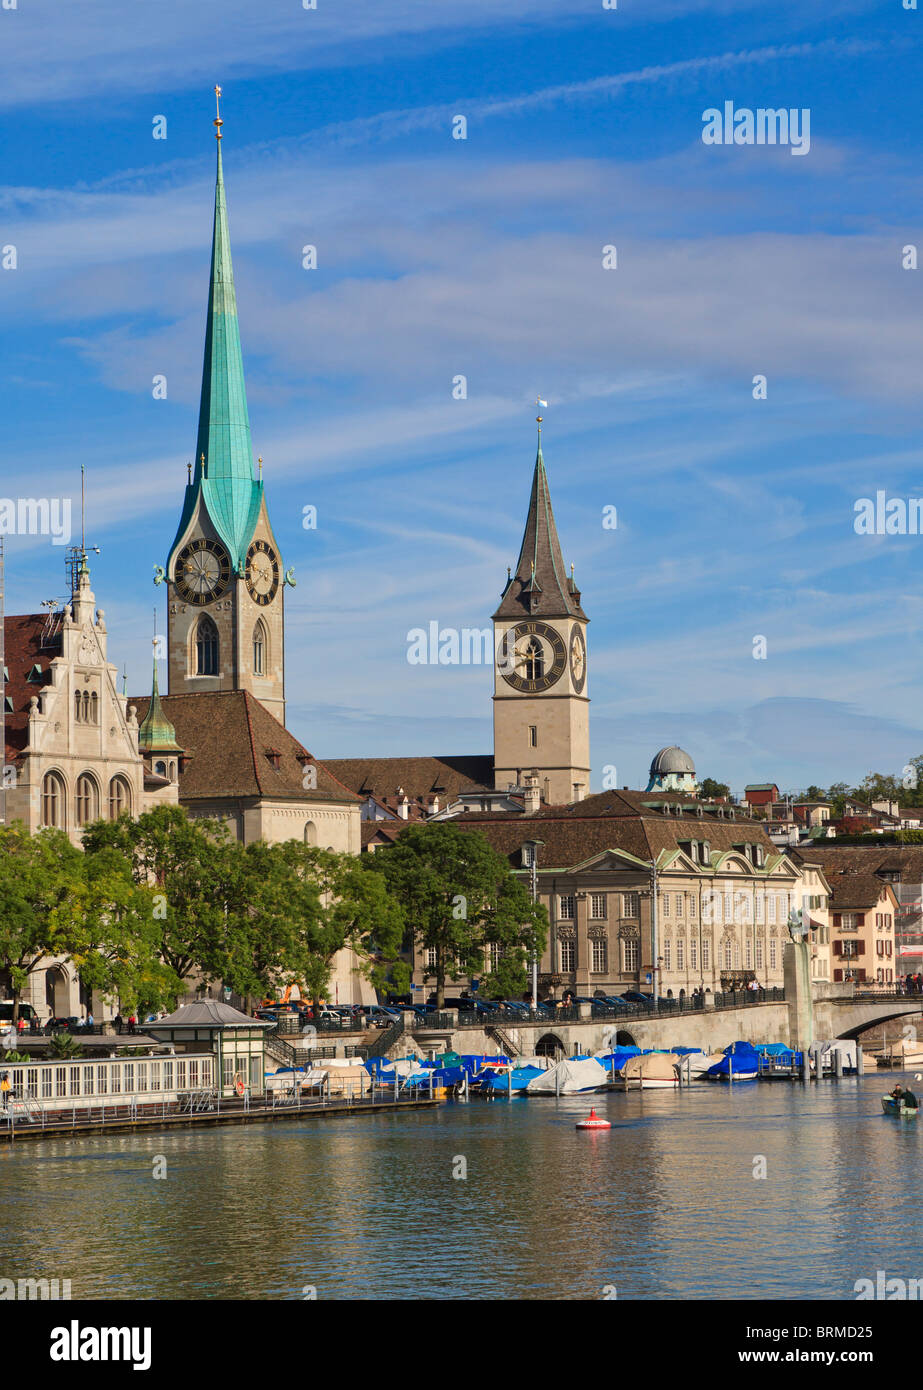 looking across the Limmat river at the Fraumunster abbey and St Peters church, in Zurich, Switzerland. Stock Photo